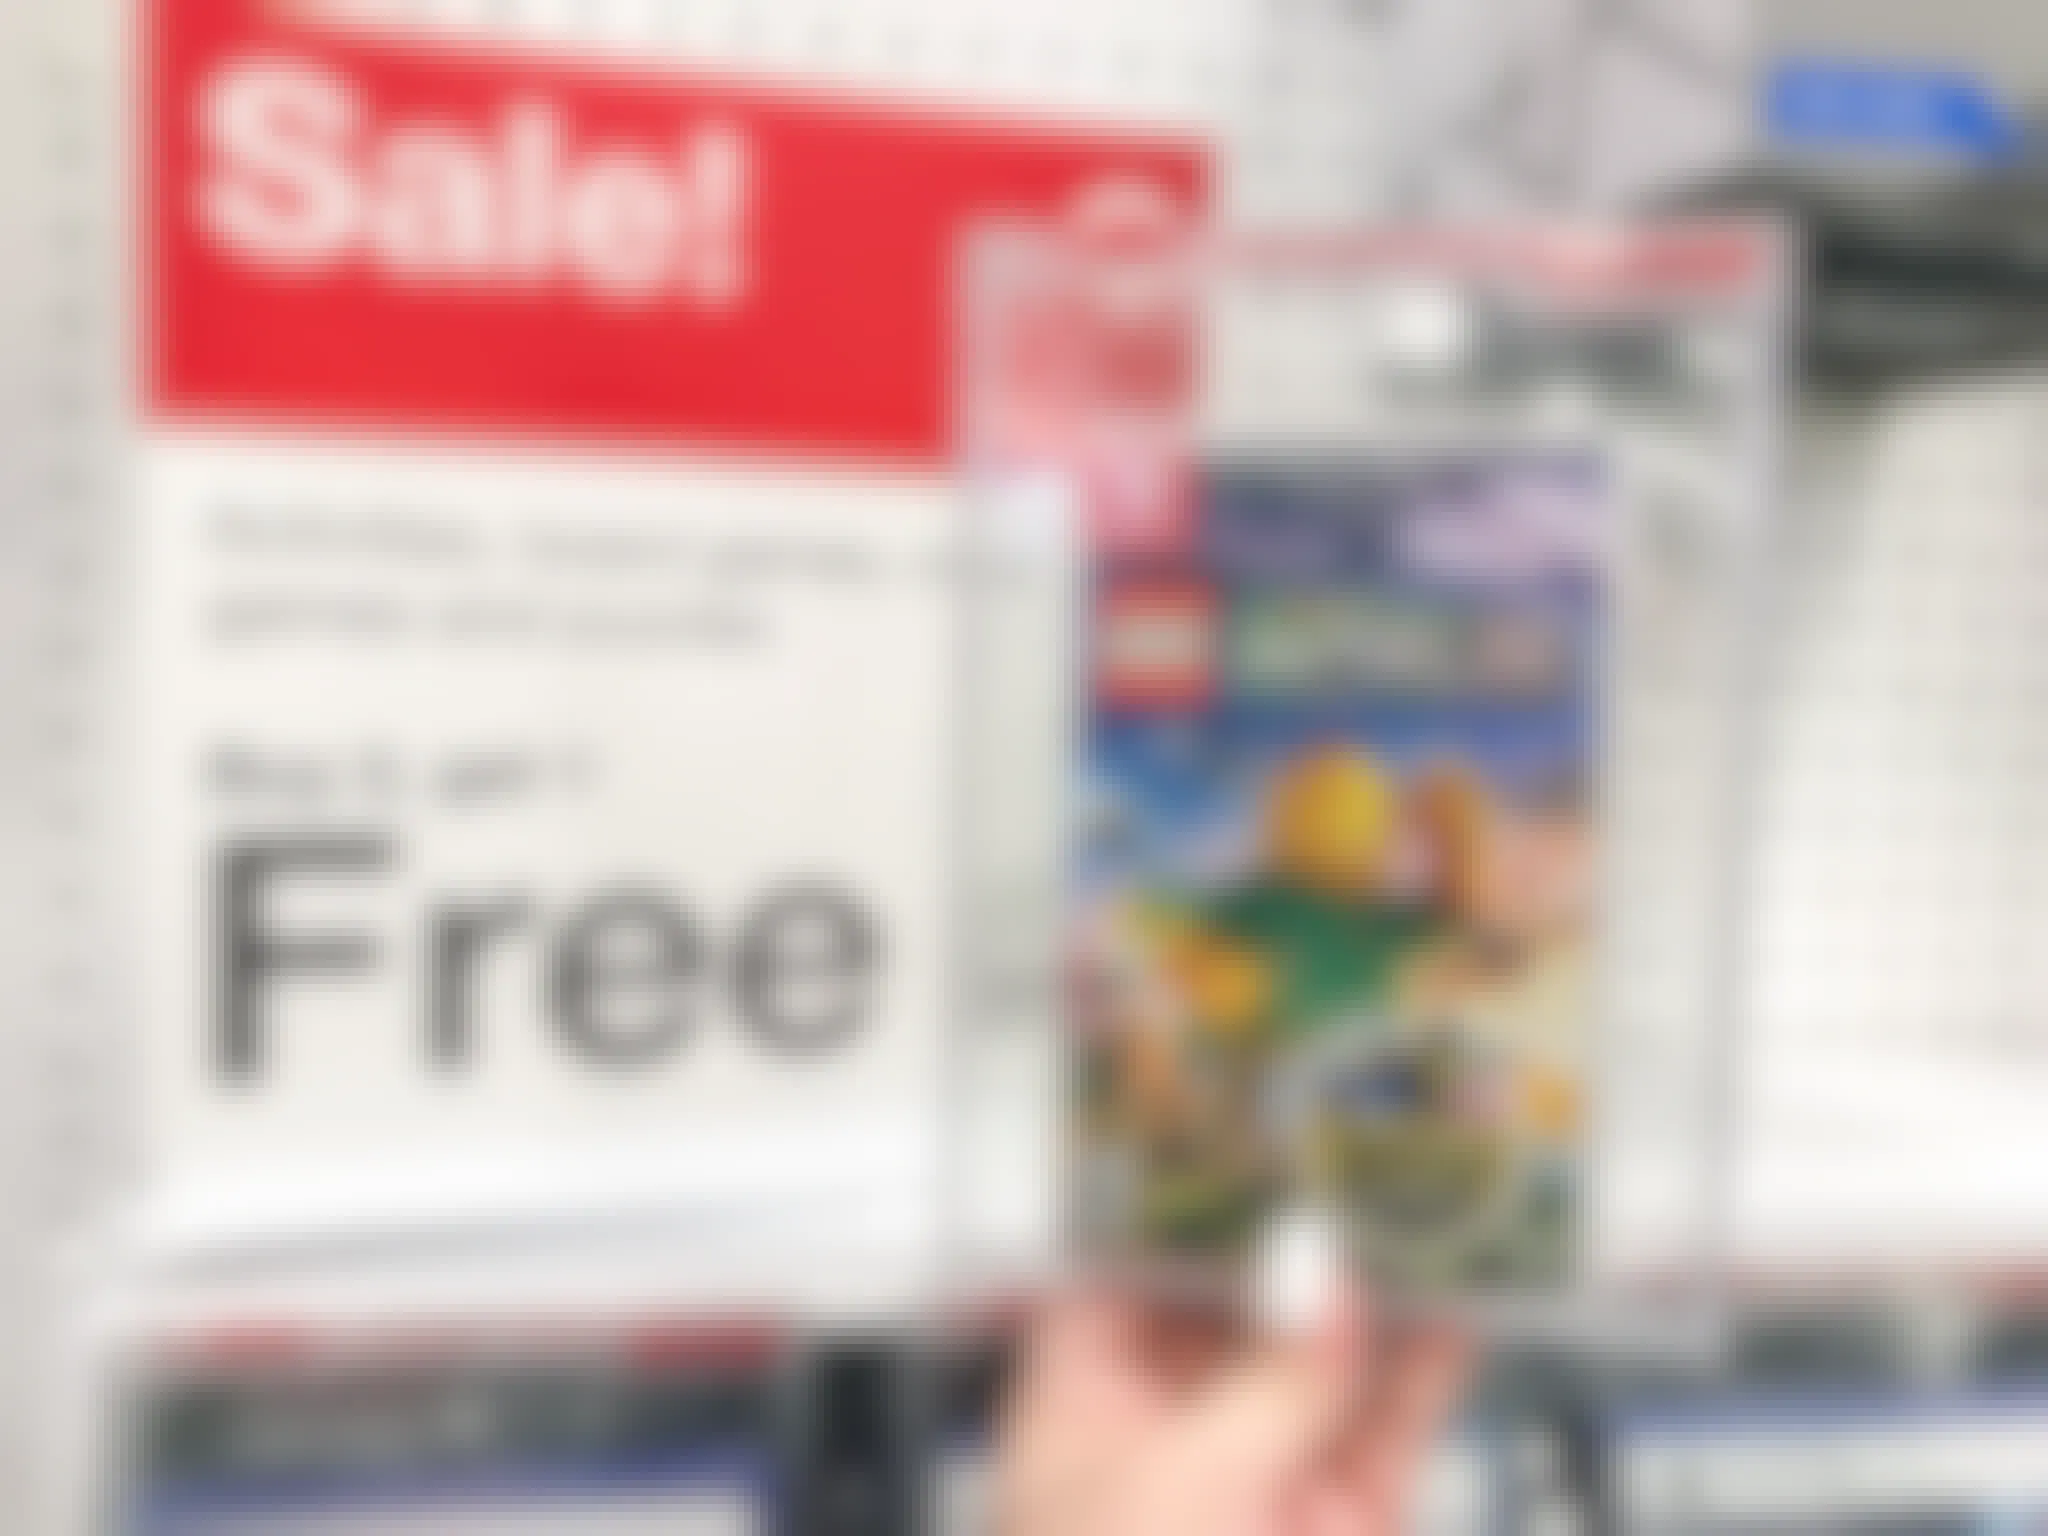 A person's hand holding up a case for LEGO Worlds game for the Nintendo Switch in front of a sign advertising a sale for Buy 2 Get 1 Free on video games and puzzles.